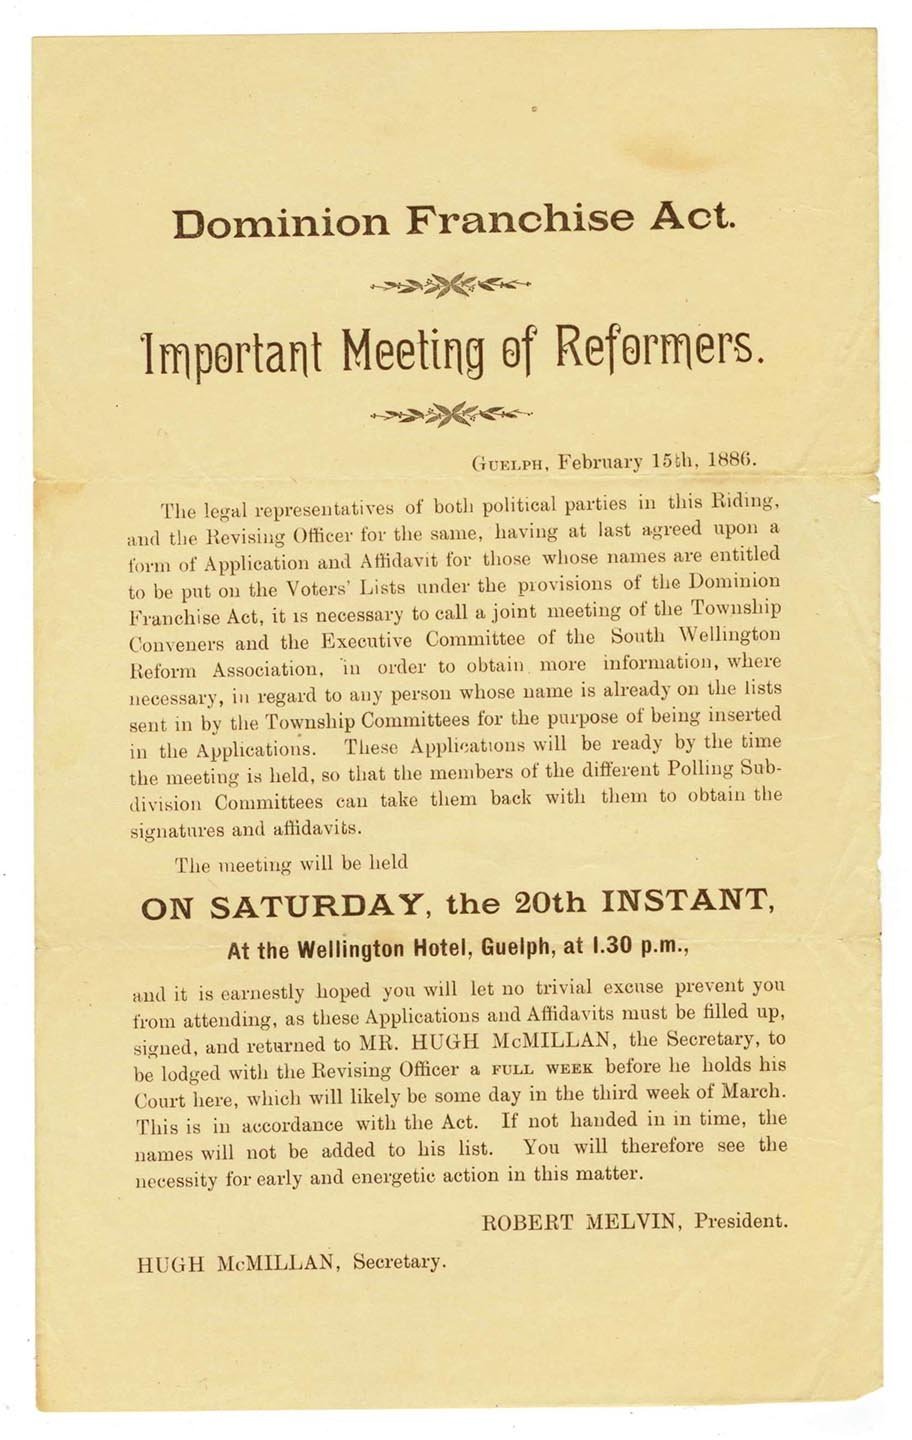 Dominion Franchise Act. Important Meeting of Reformers, Guelph, February 15th, 1886